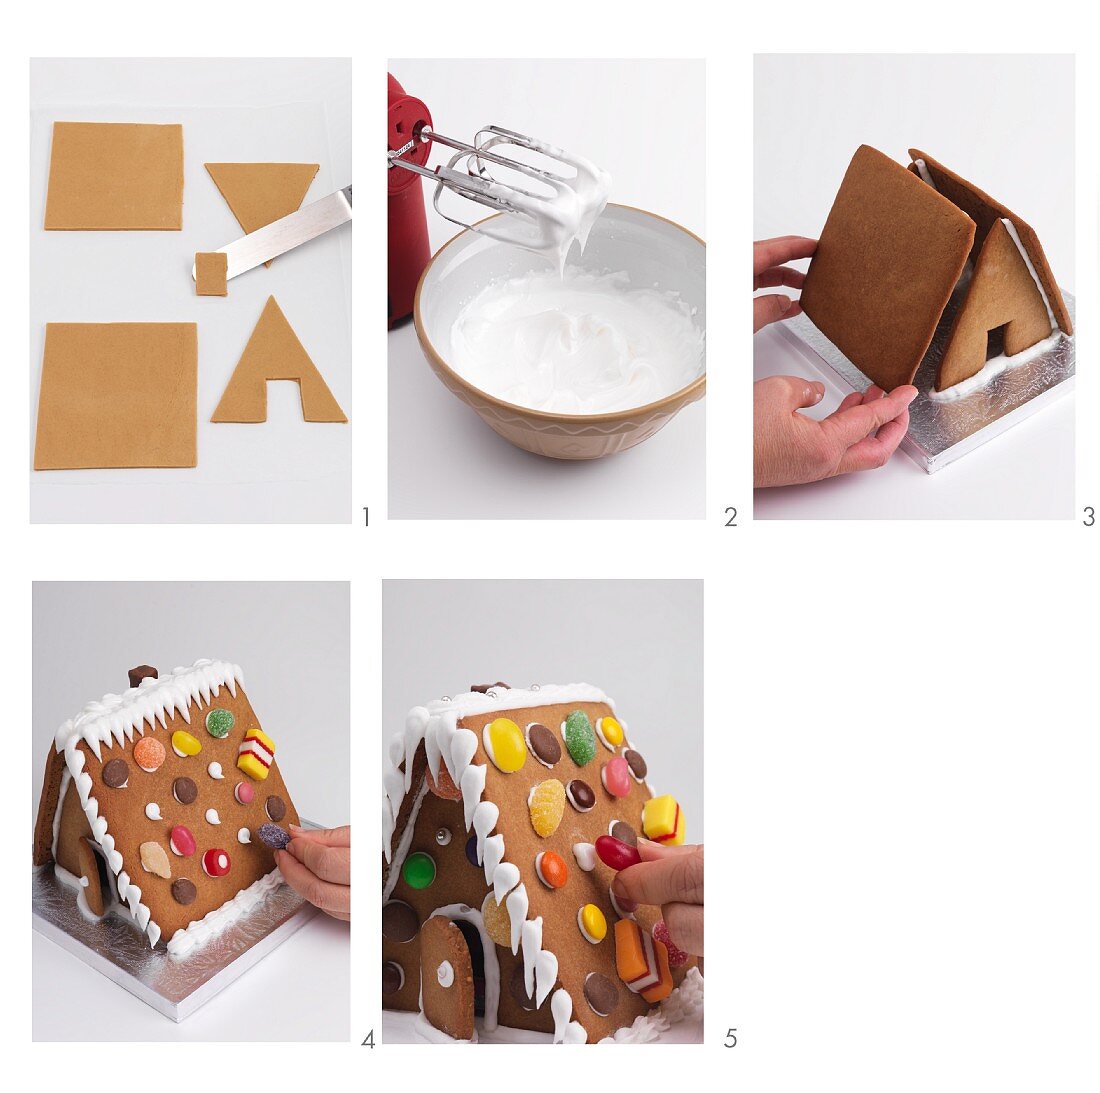 A gingerbread house being made